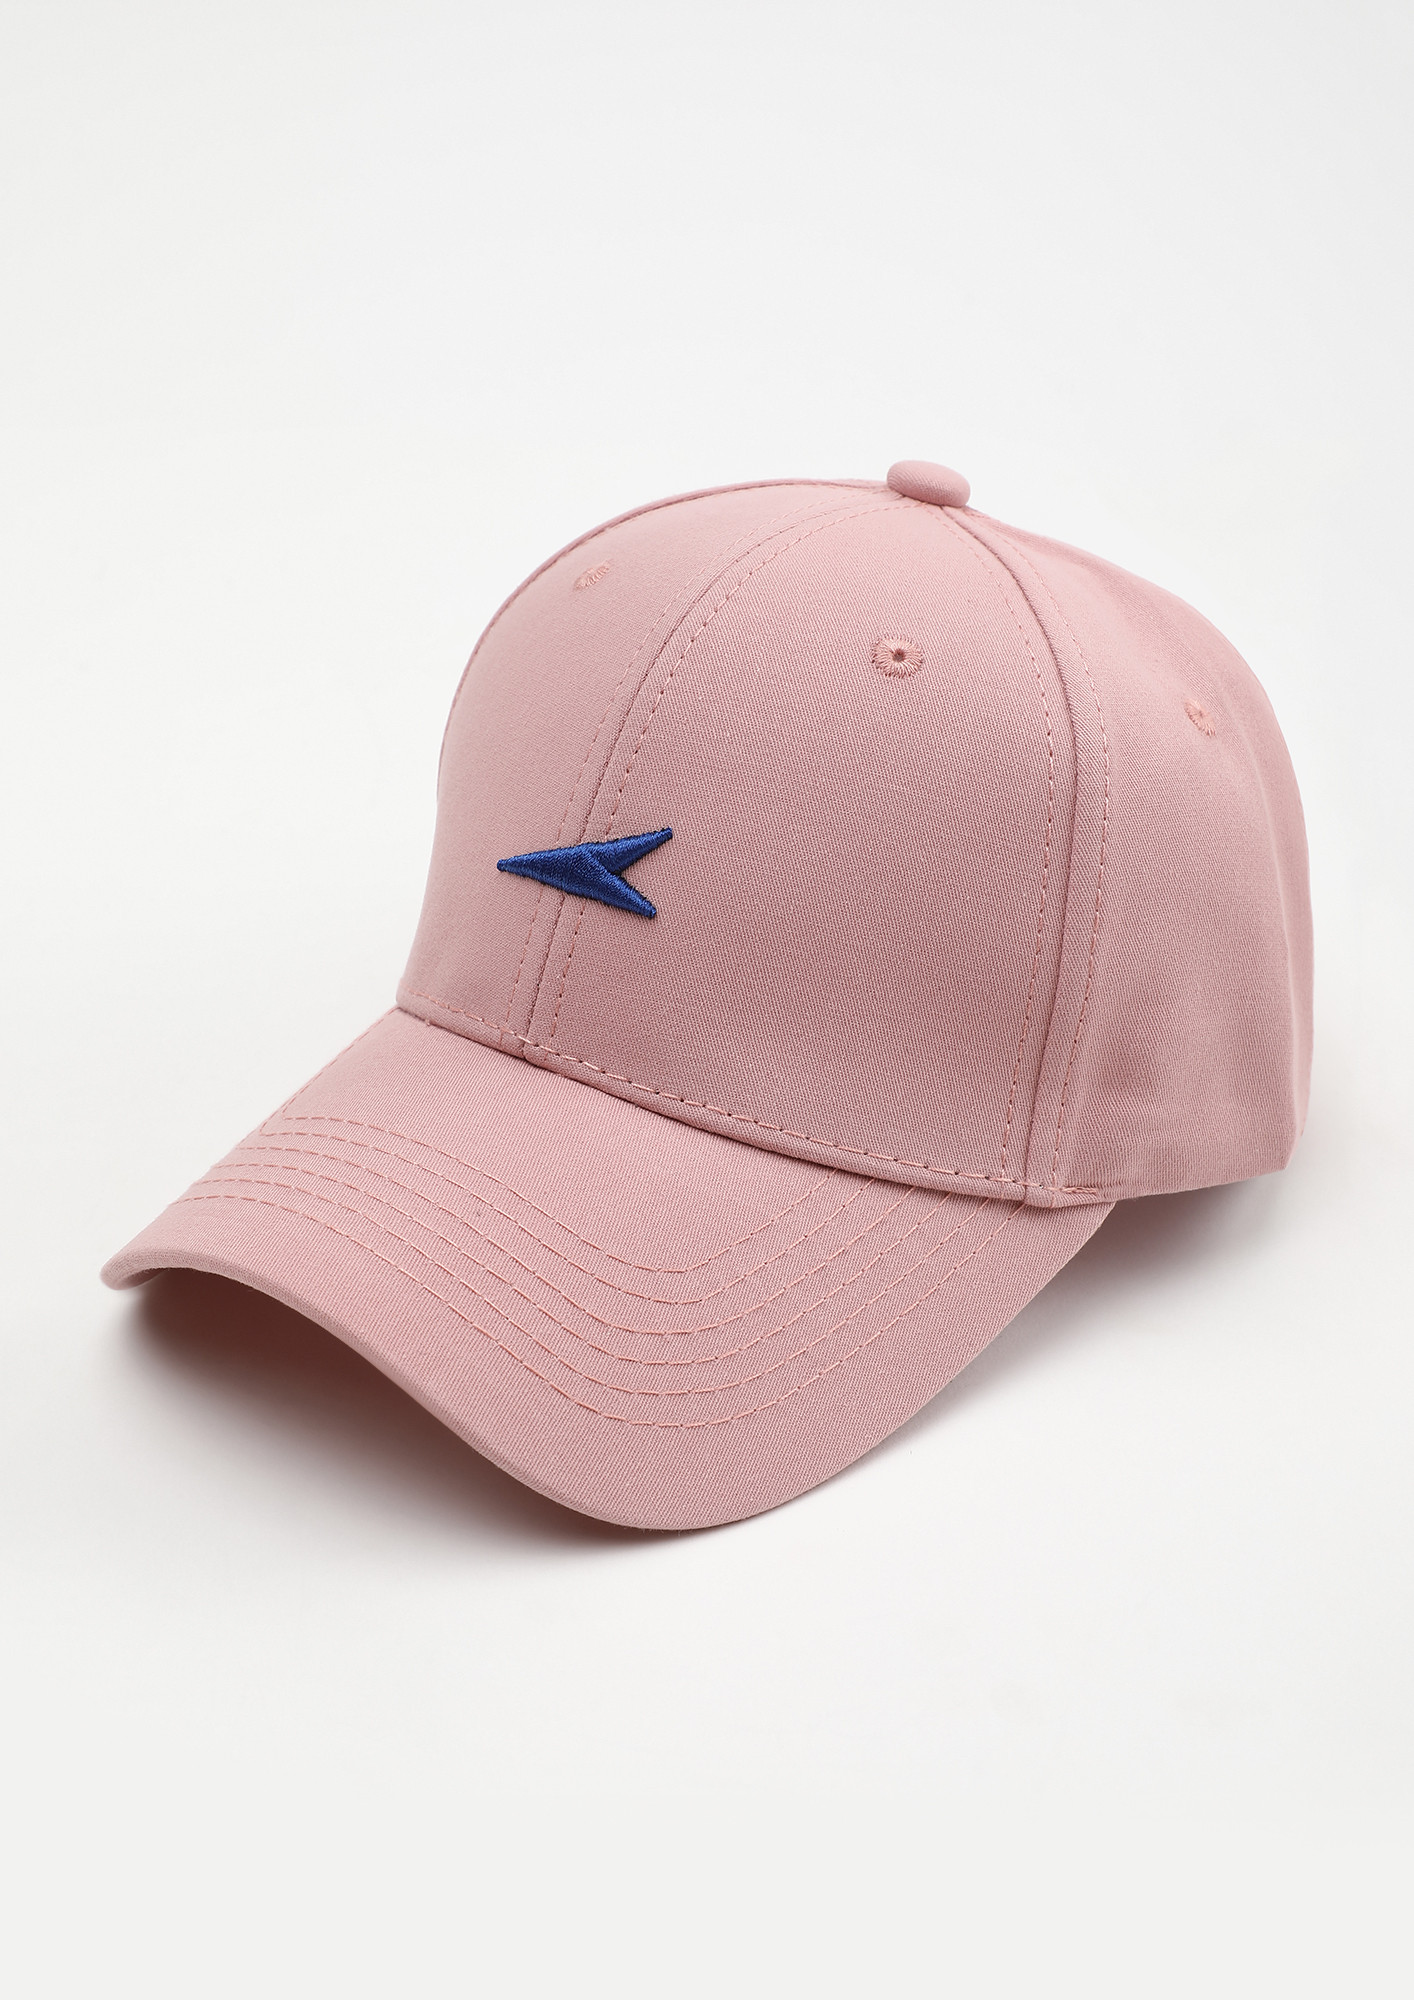 Flying Paper Planes Pink Cap